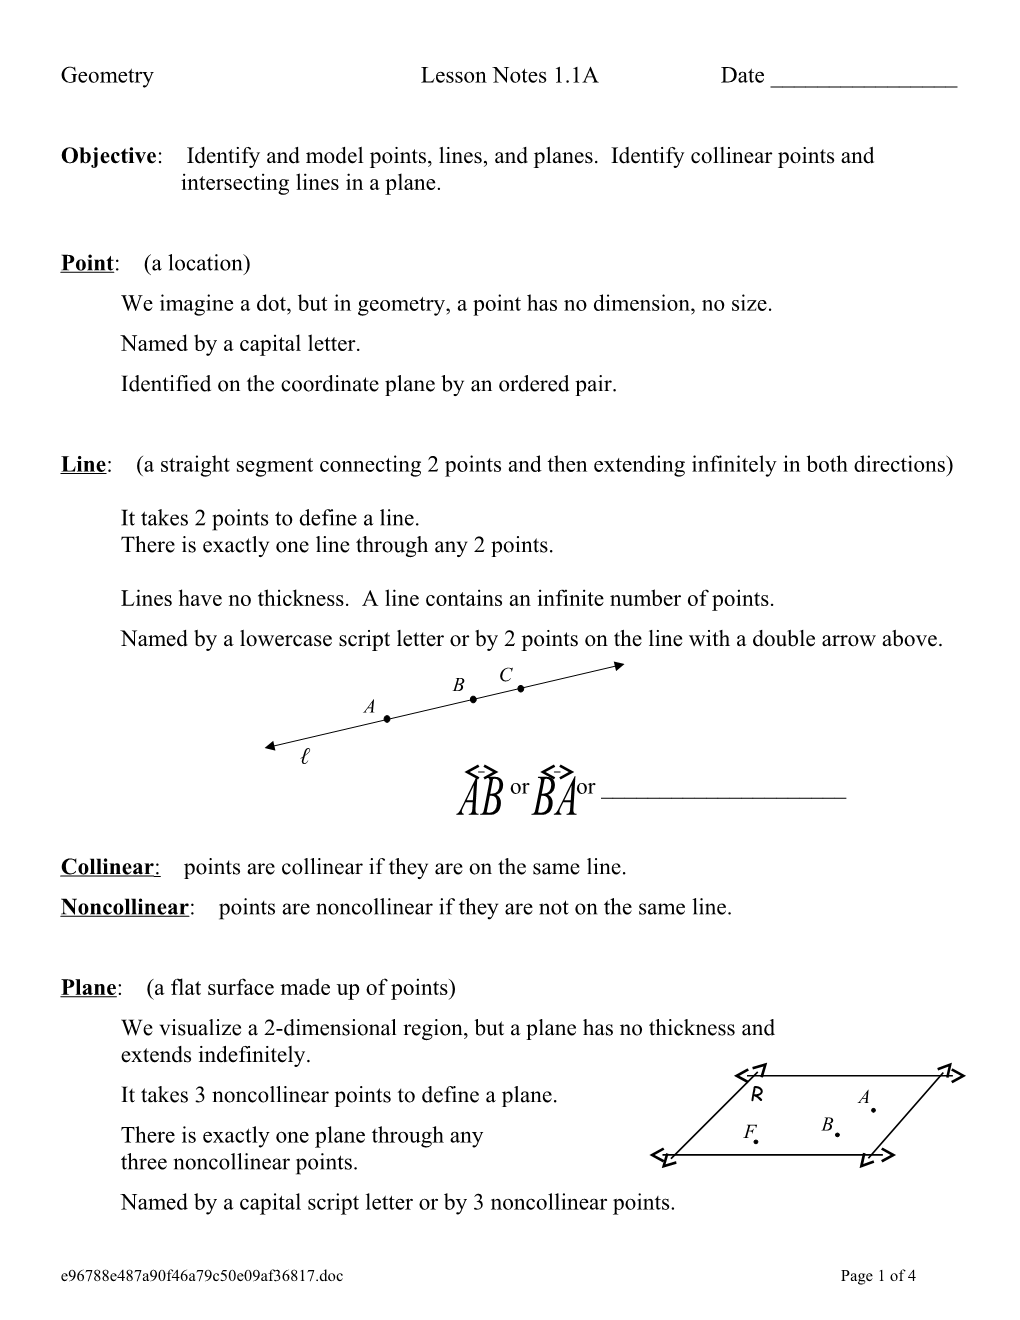 Objective: Identify and Model Points, Lines, and Planes. Identify Collinear Points And